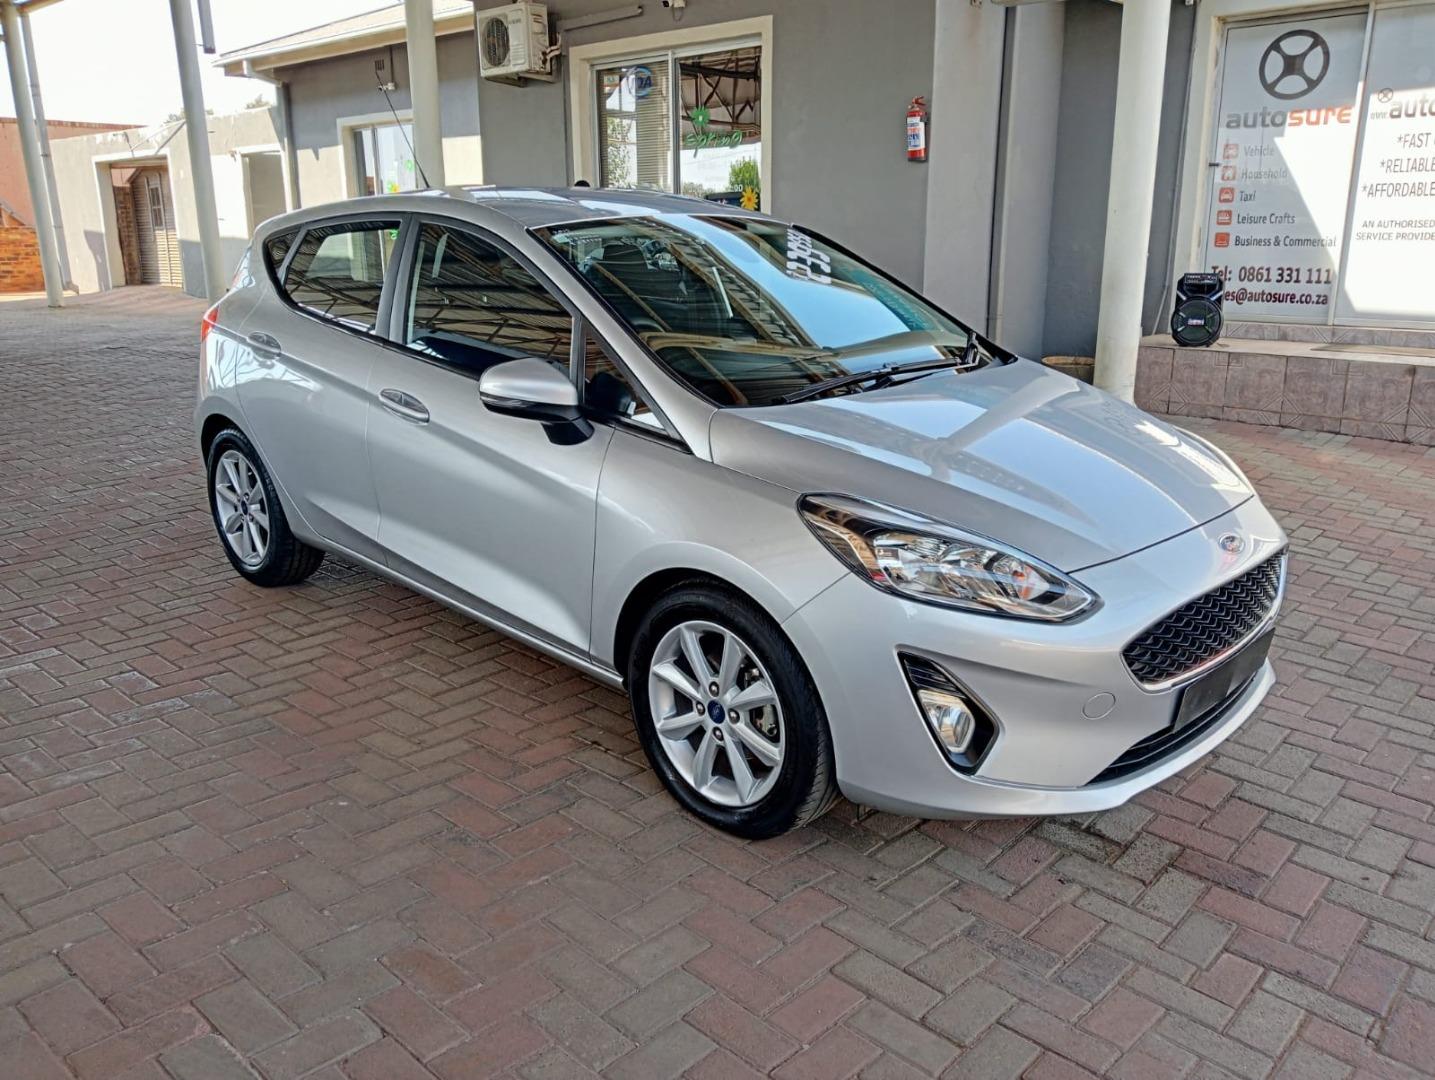 2019 Ford Fiesta 1.5TDCi Trend For Sale